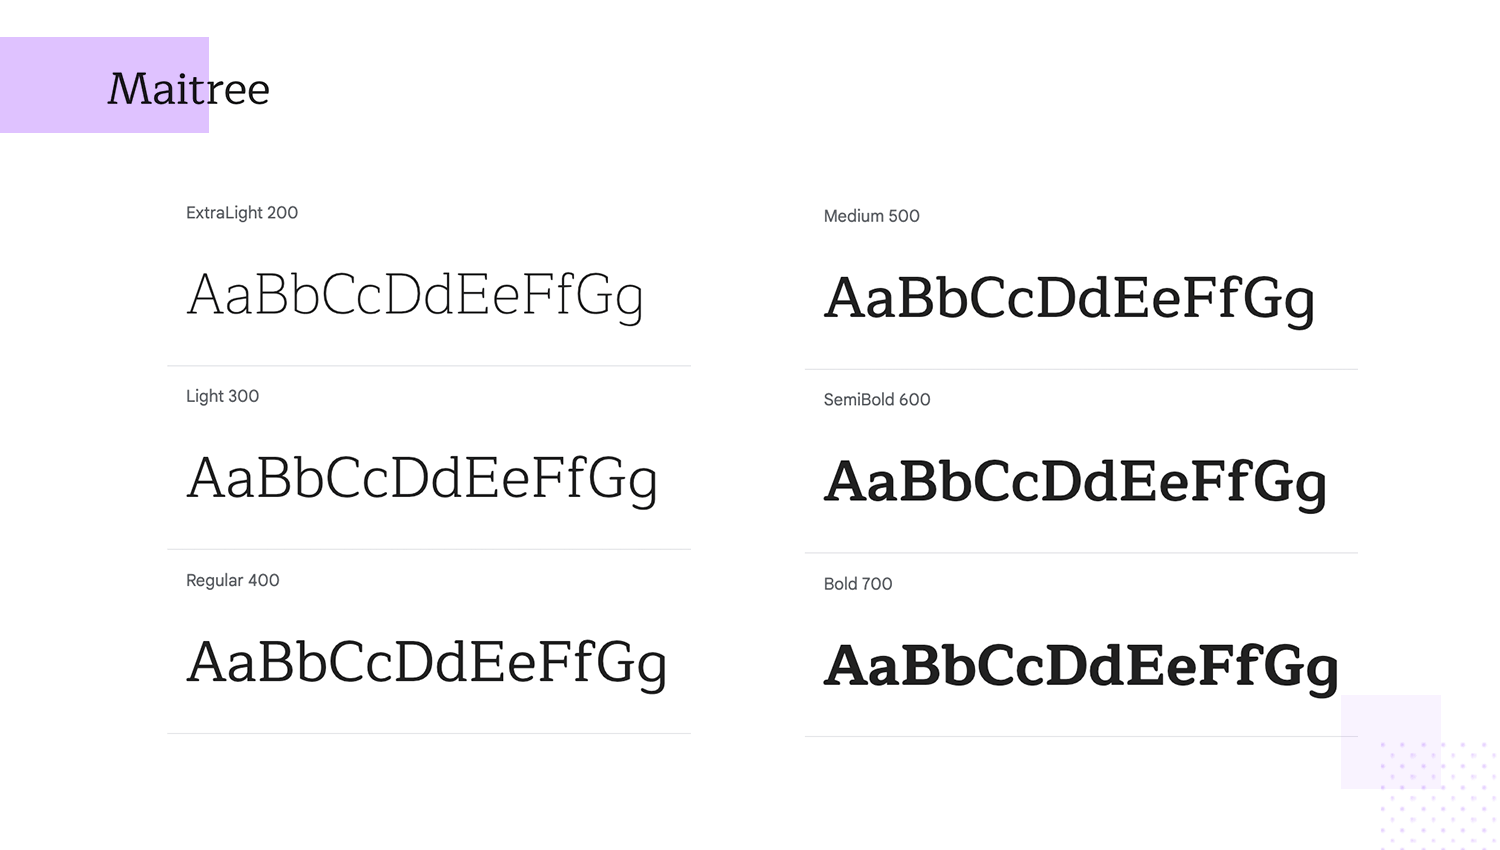 Maitree font showcase with weights from ExtraLight to Bold.